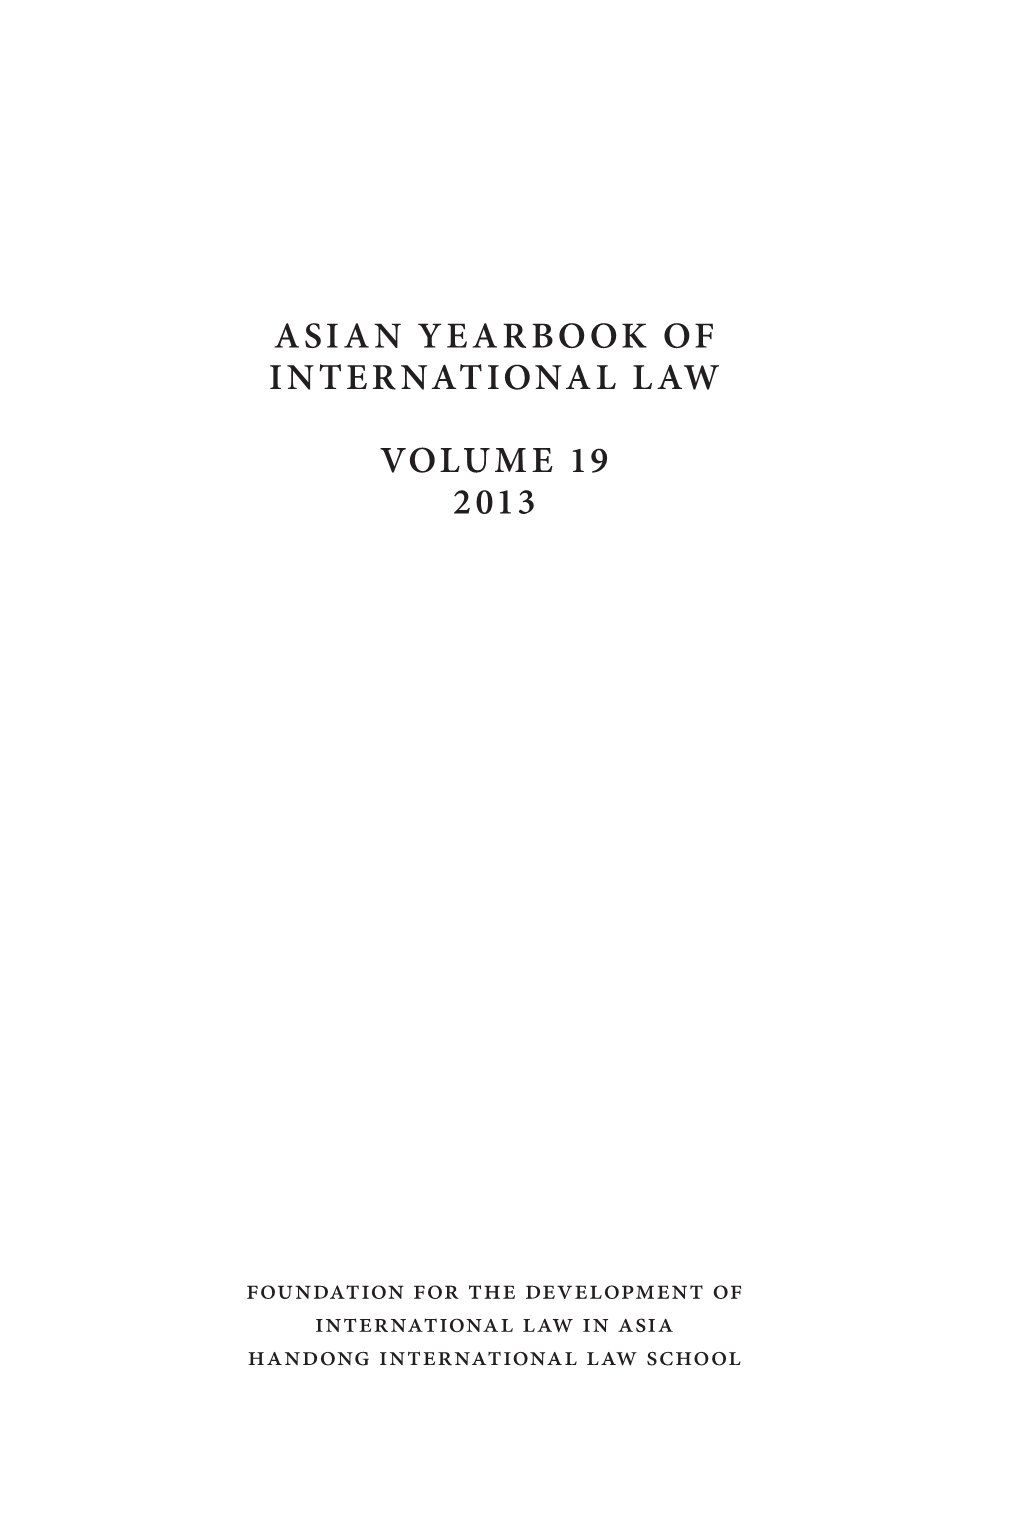 Asian Yearbook of International Law Volume